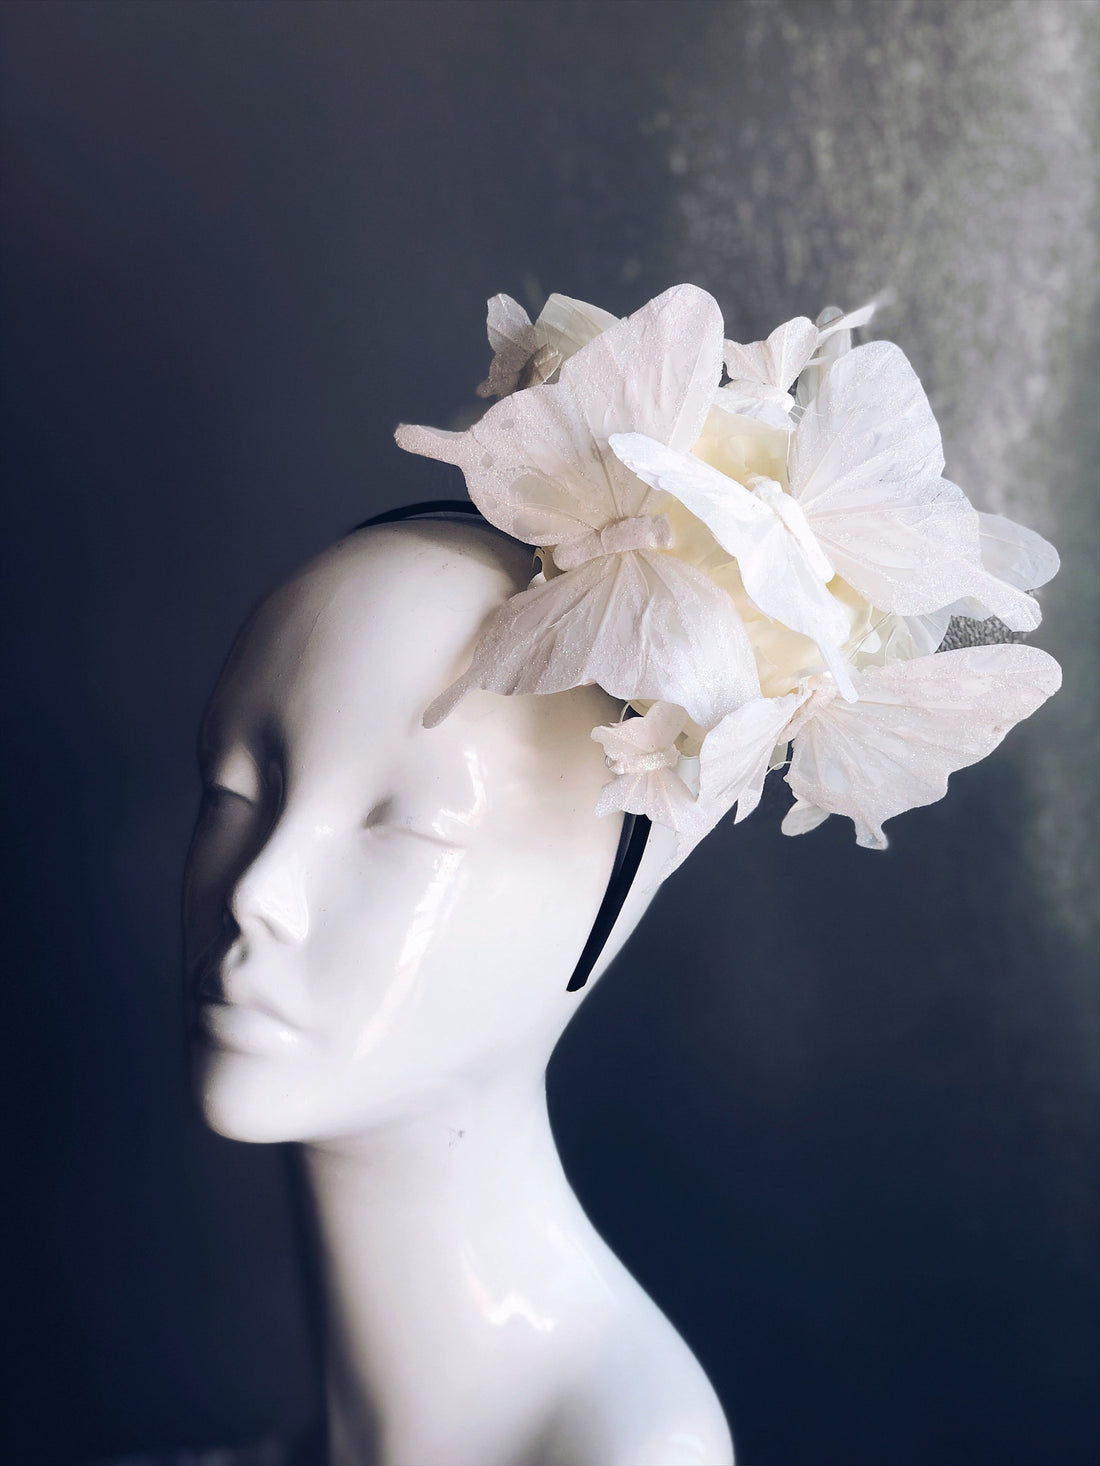 Fascinator hat with white butterflies on a white flower.